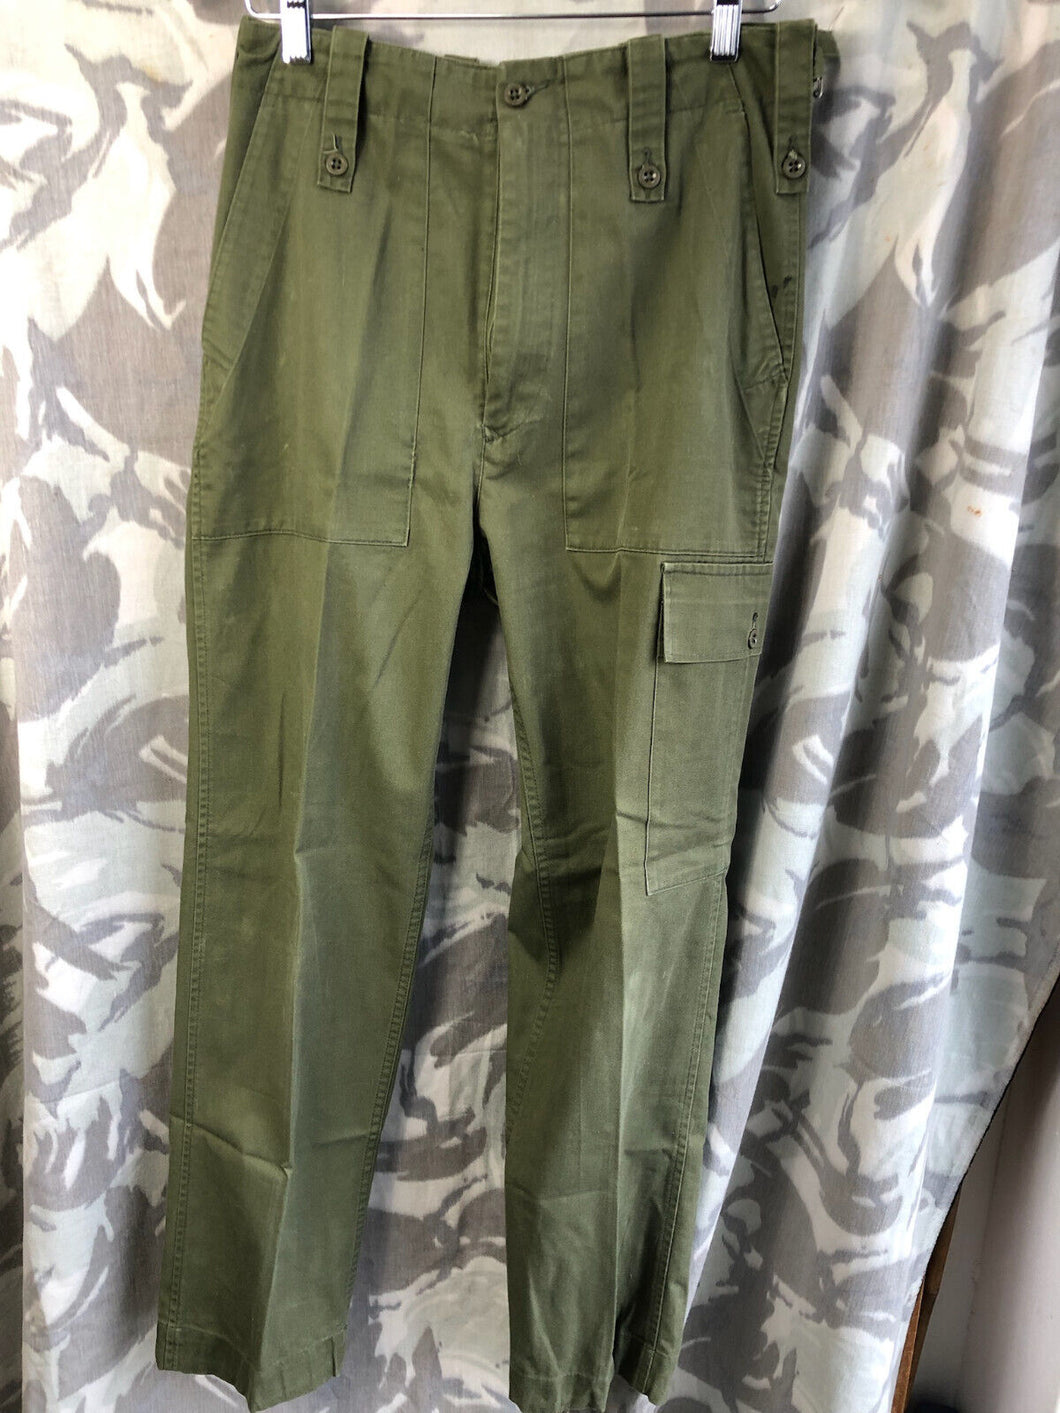 Genuine British Army OD Green Fatigue Combat Trousers - Size 32